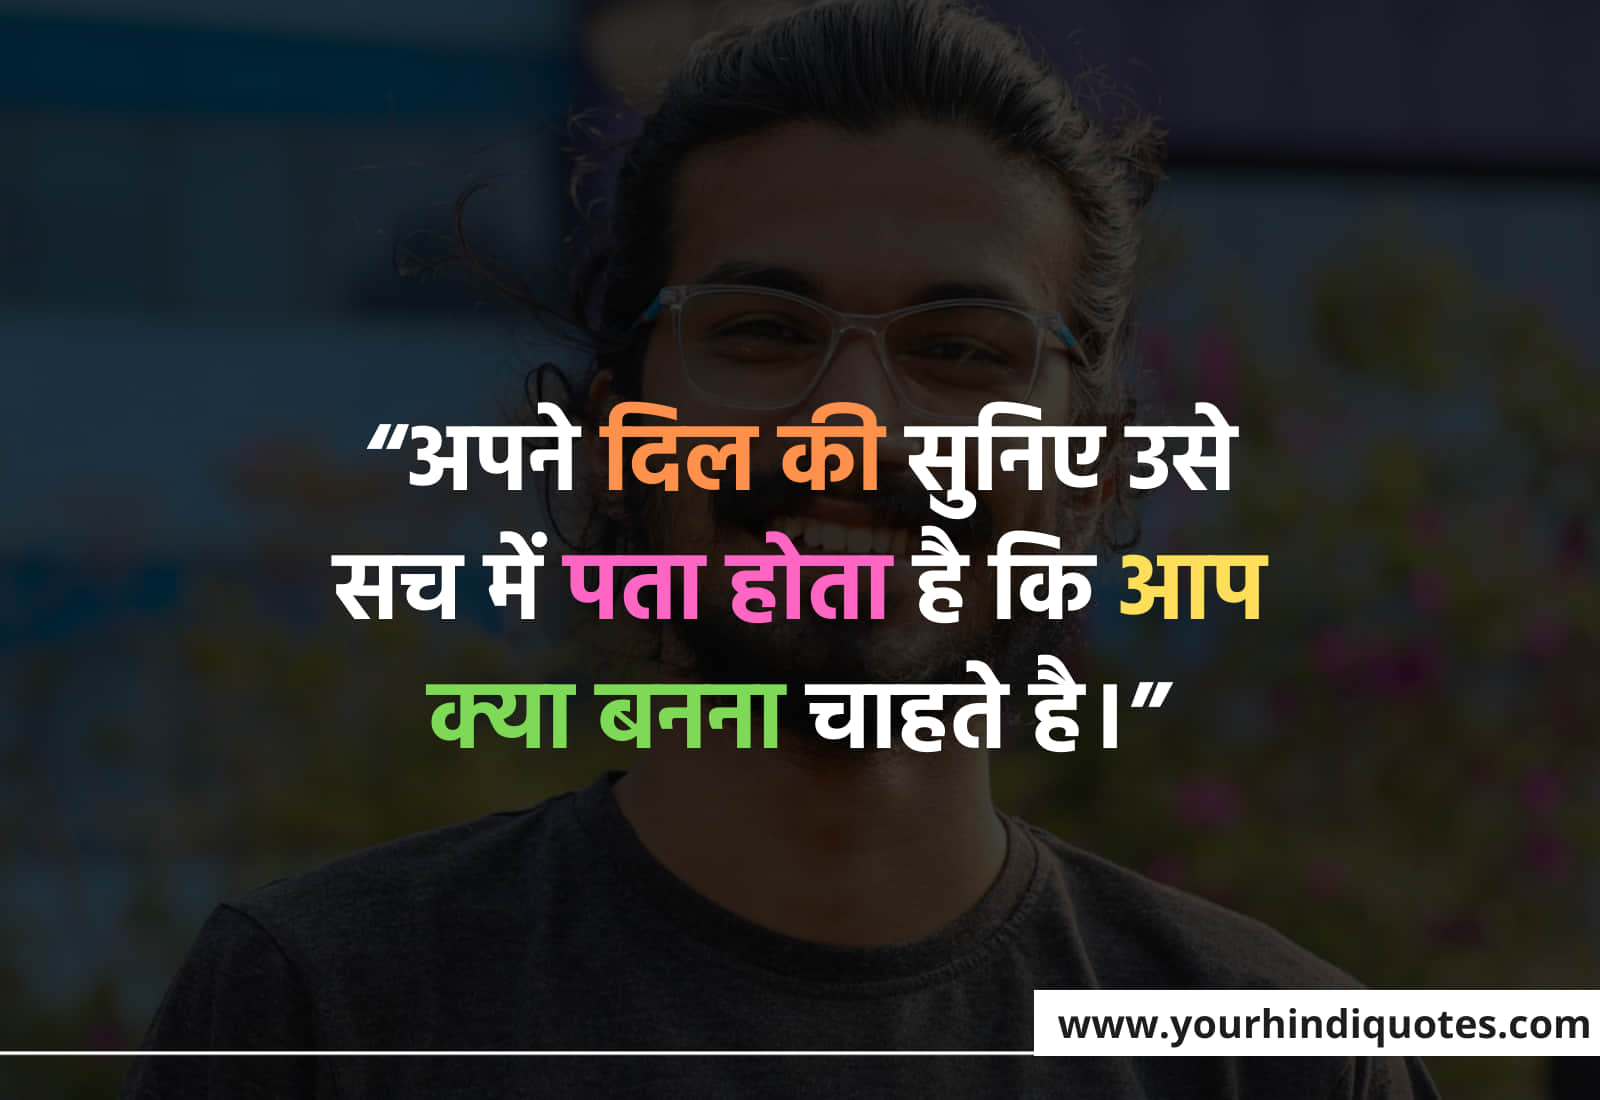 Hindi Students Quotes For Success